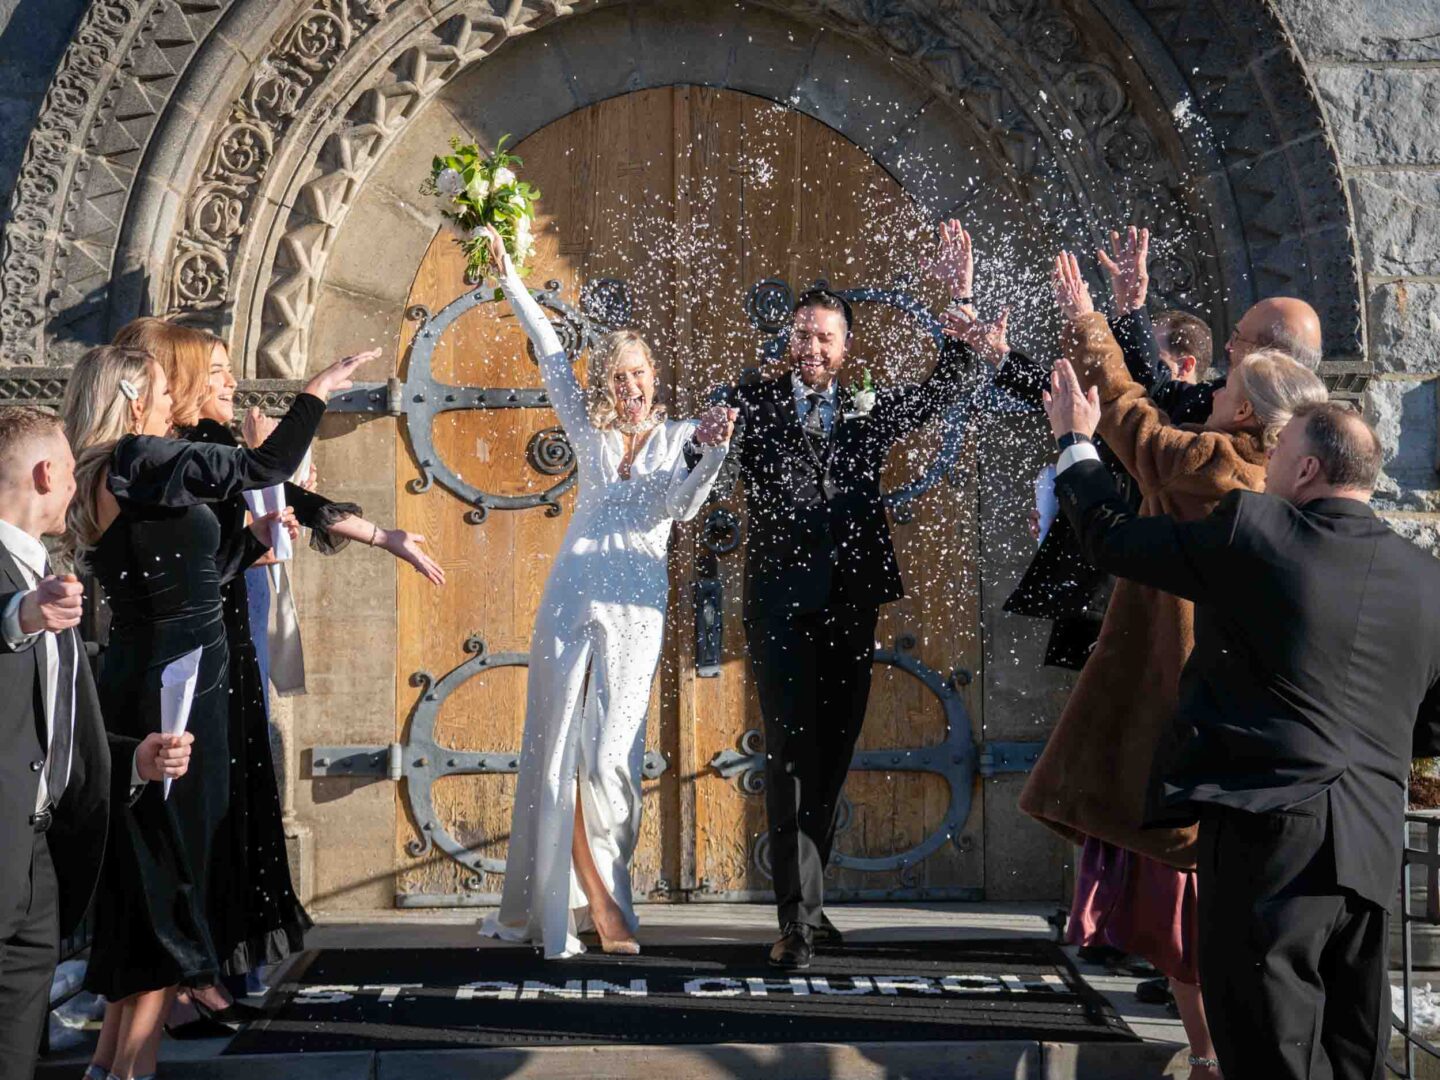 Bride and groom leaving the church after being married, throwing confetti